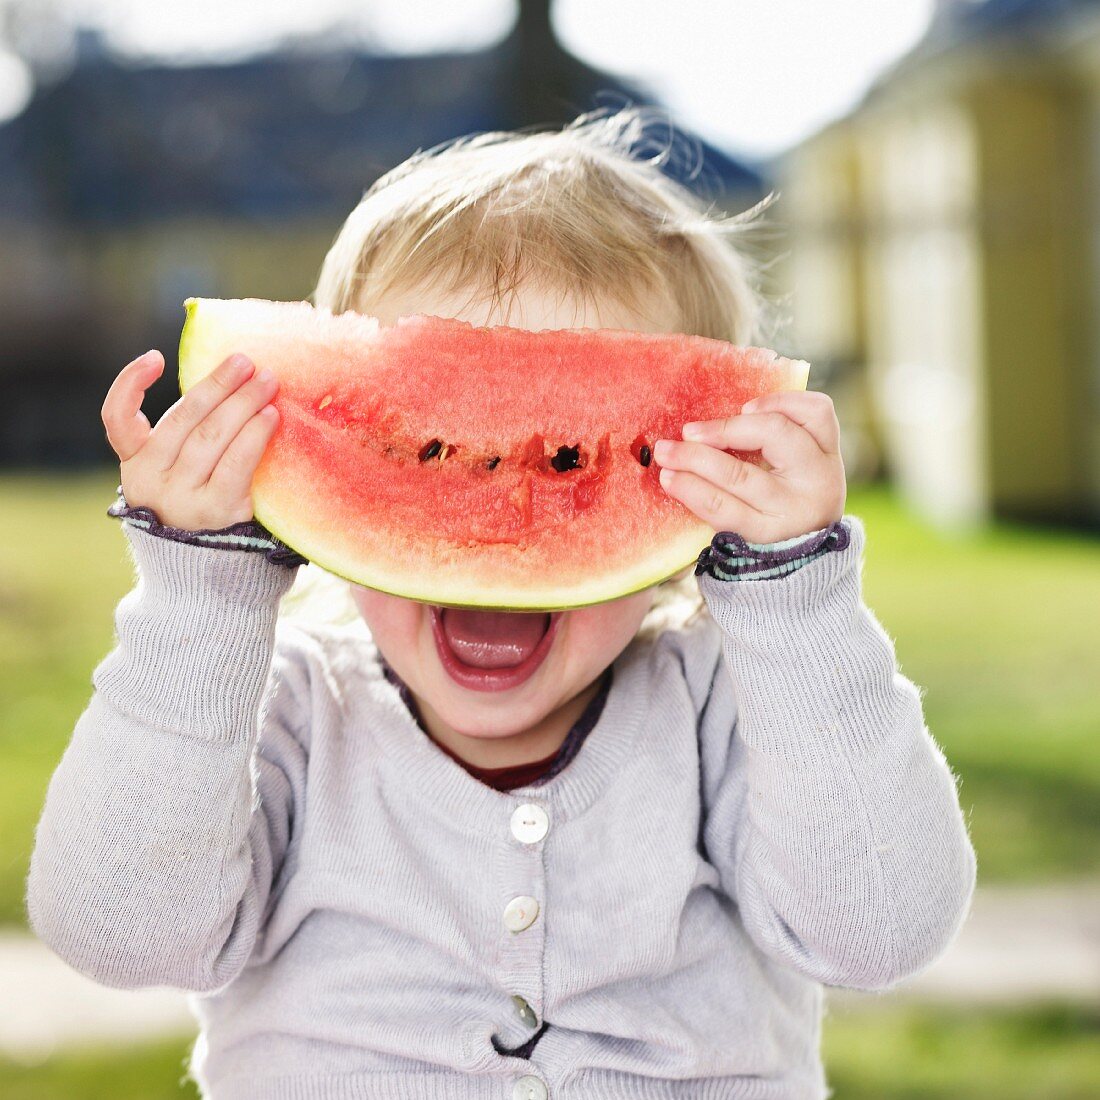 A little girl hiding behind a slice of watermelon